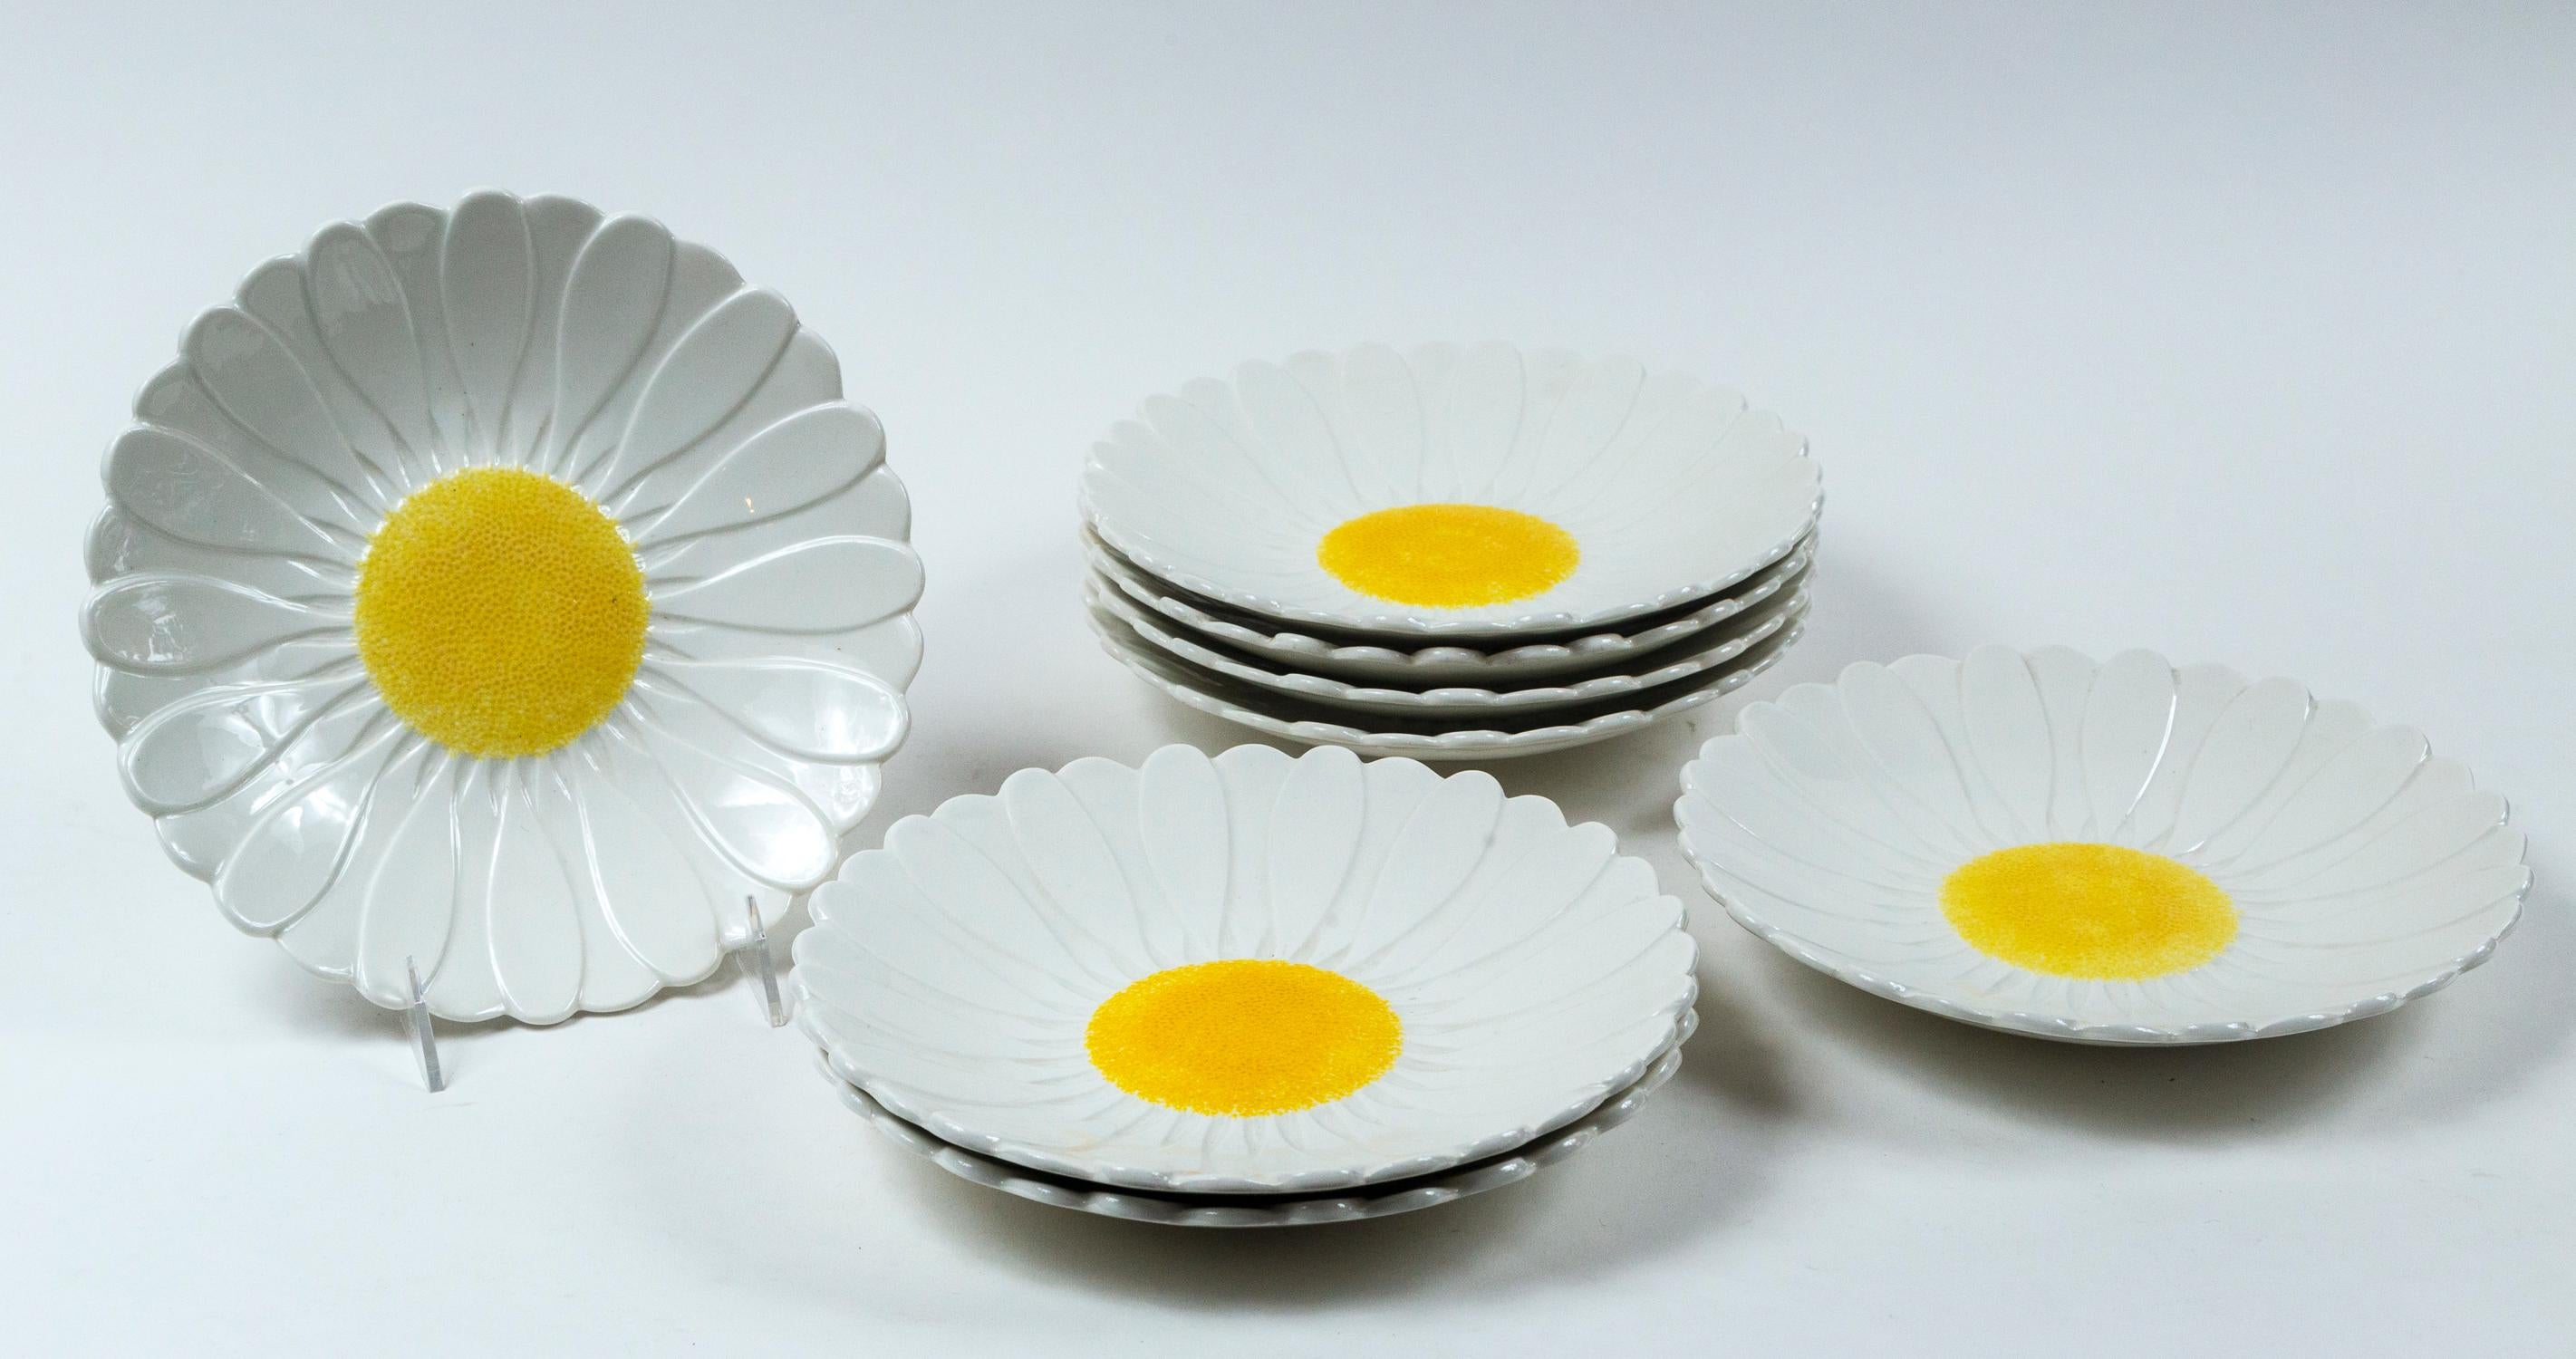 Set of 8 ceramic daisy plates, Gien, France, circa 1950's. Bold mid-century design, white with yellow center. Manufactured by Gien.